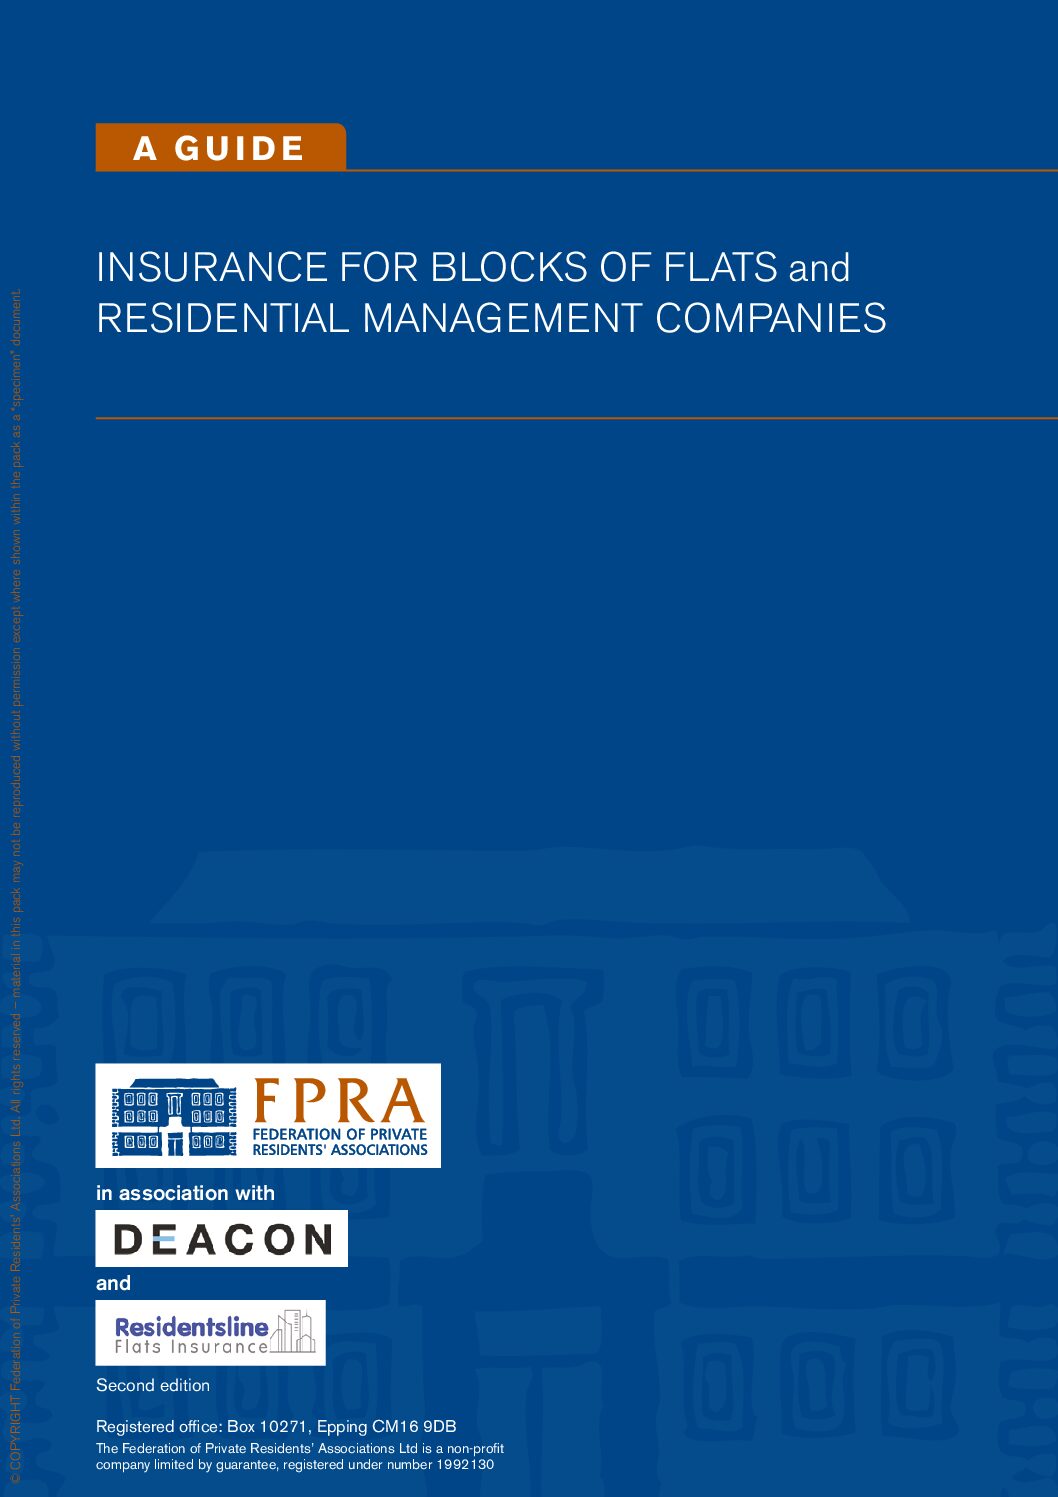 Insurance for blocks of flats, residential management companies and right to manage companies – A Guide. 2nd Edition (November 2020)